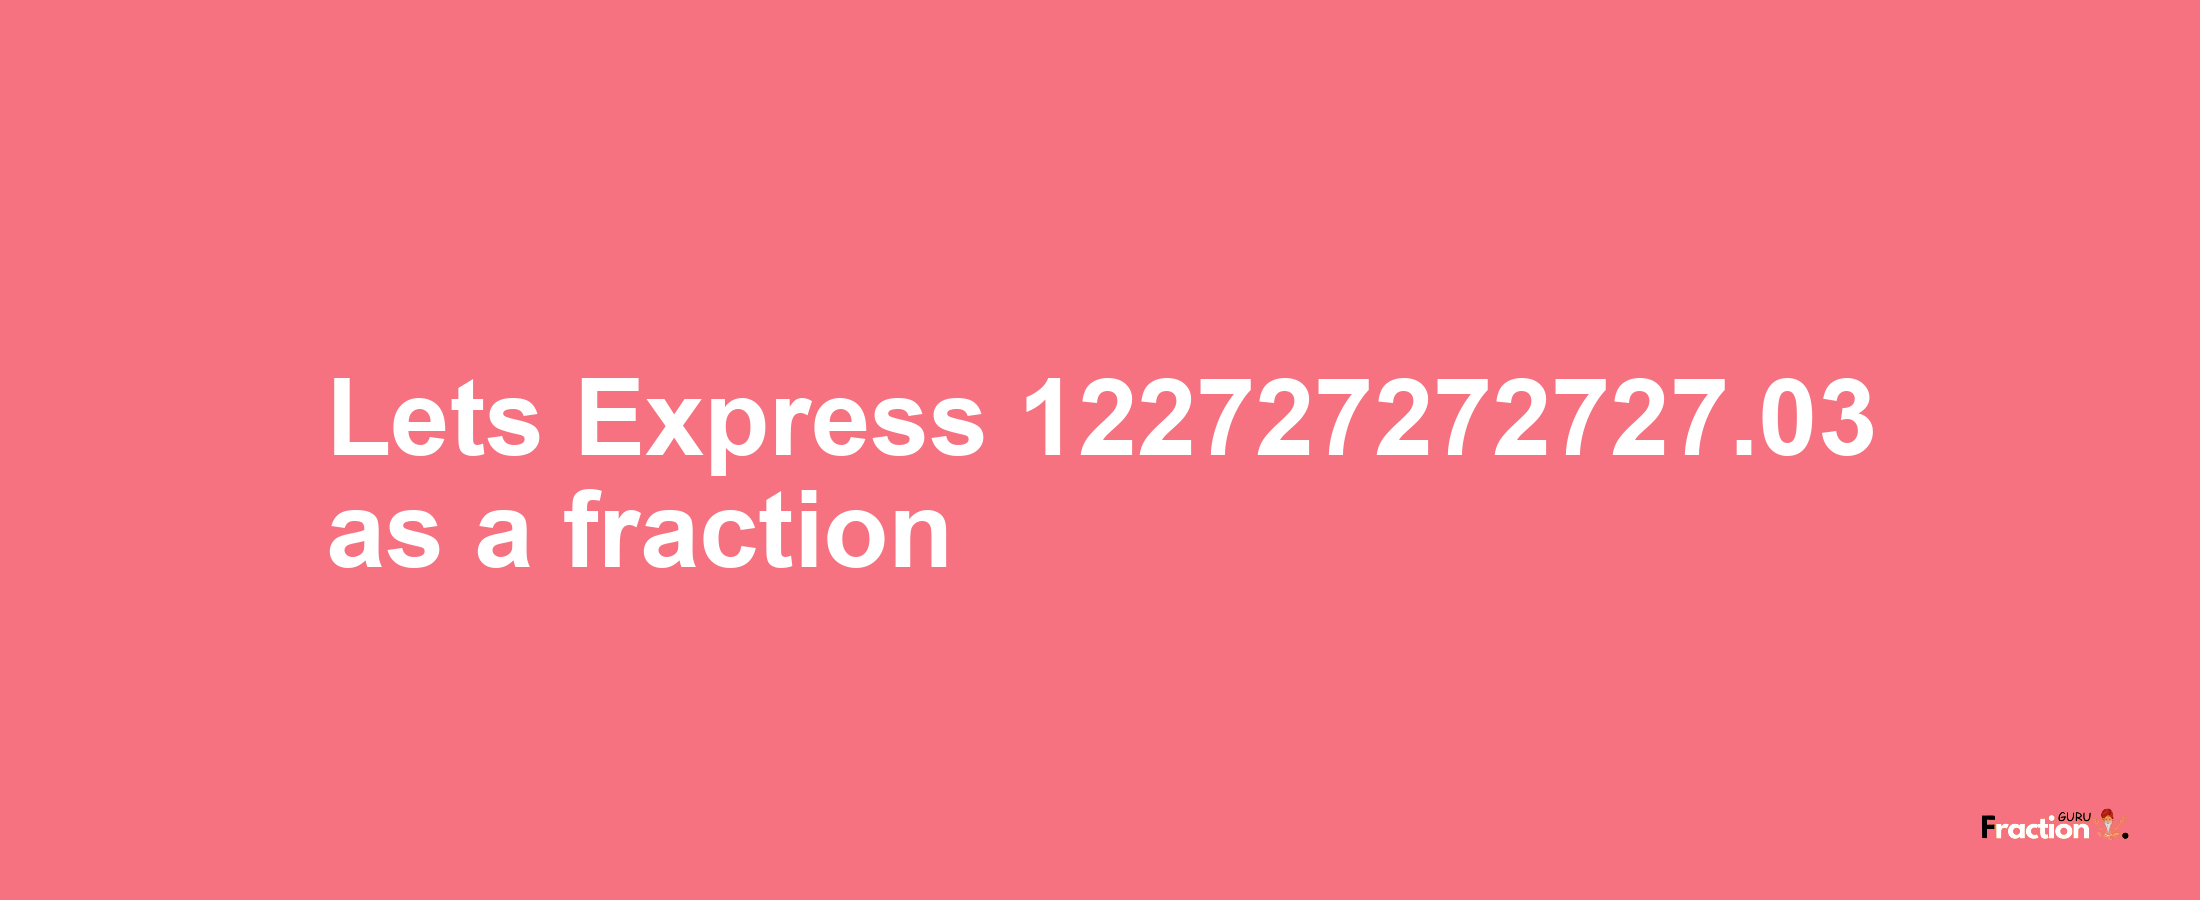 Lets Express 122727272727.03 as afraction